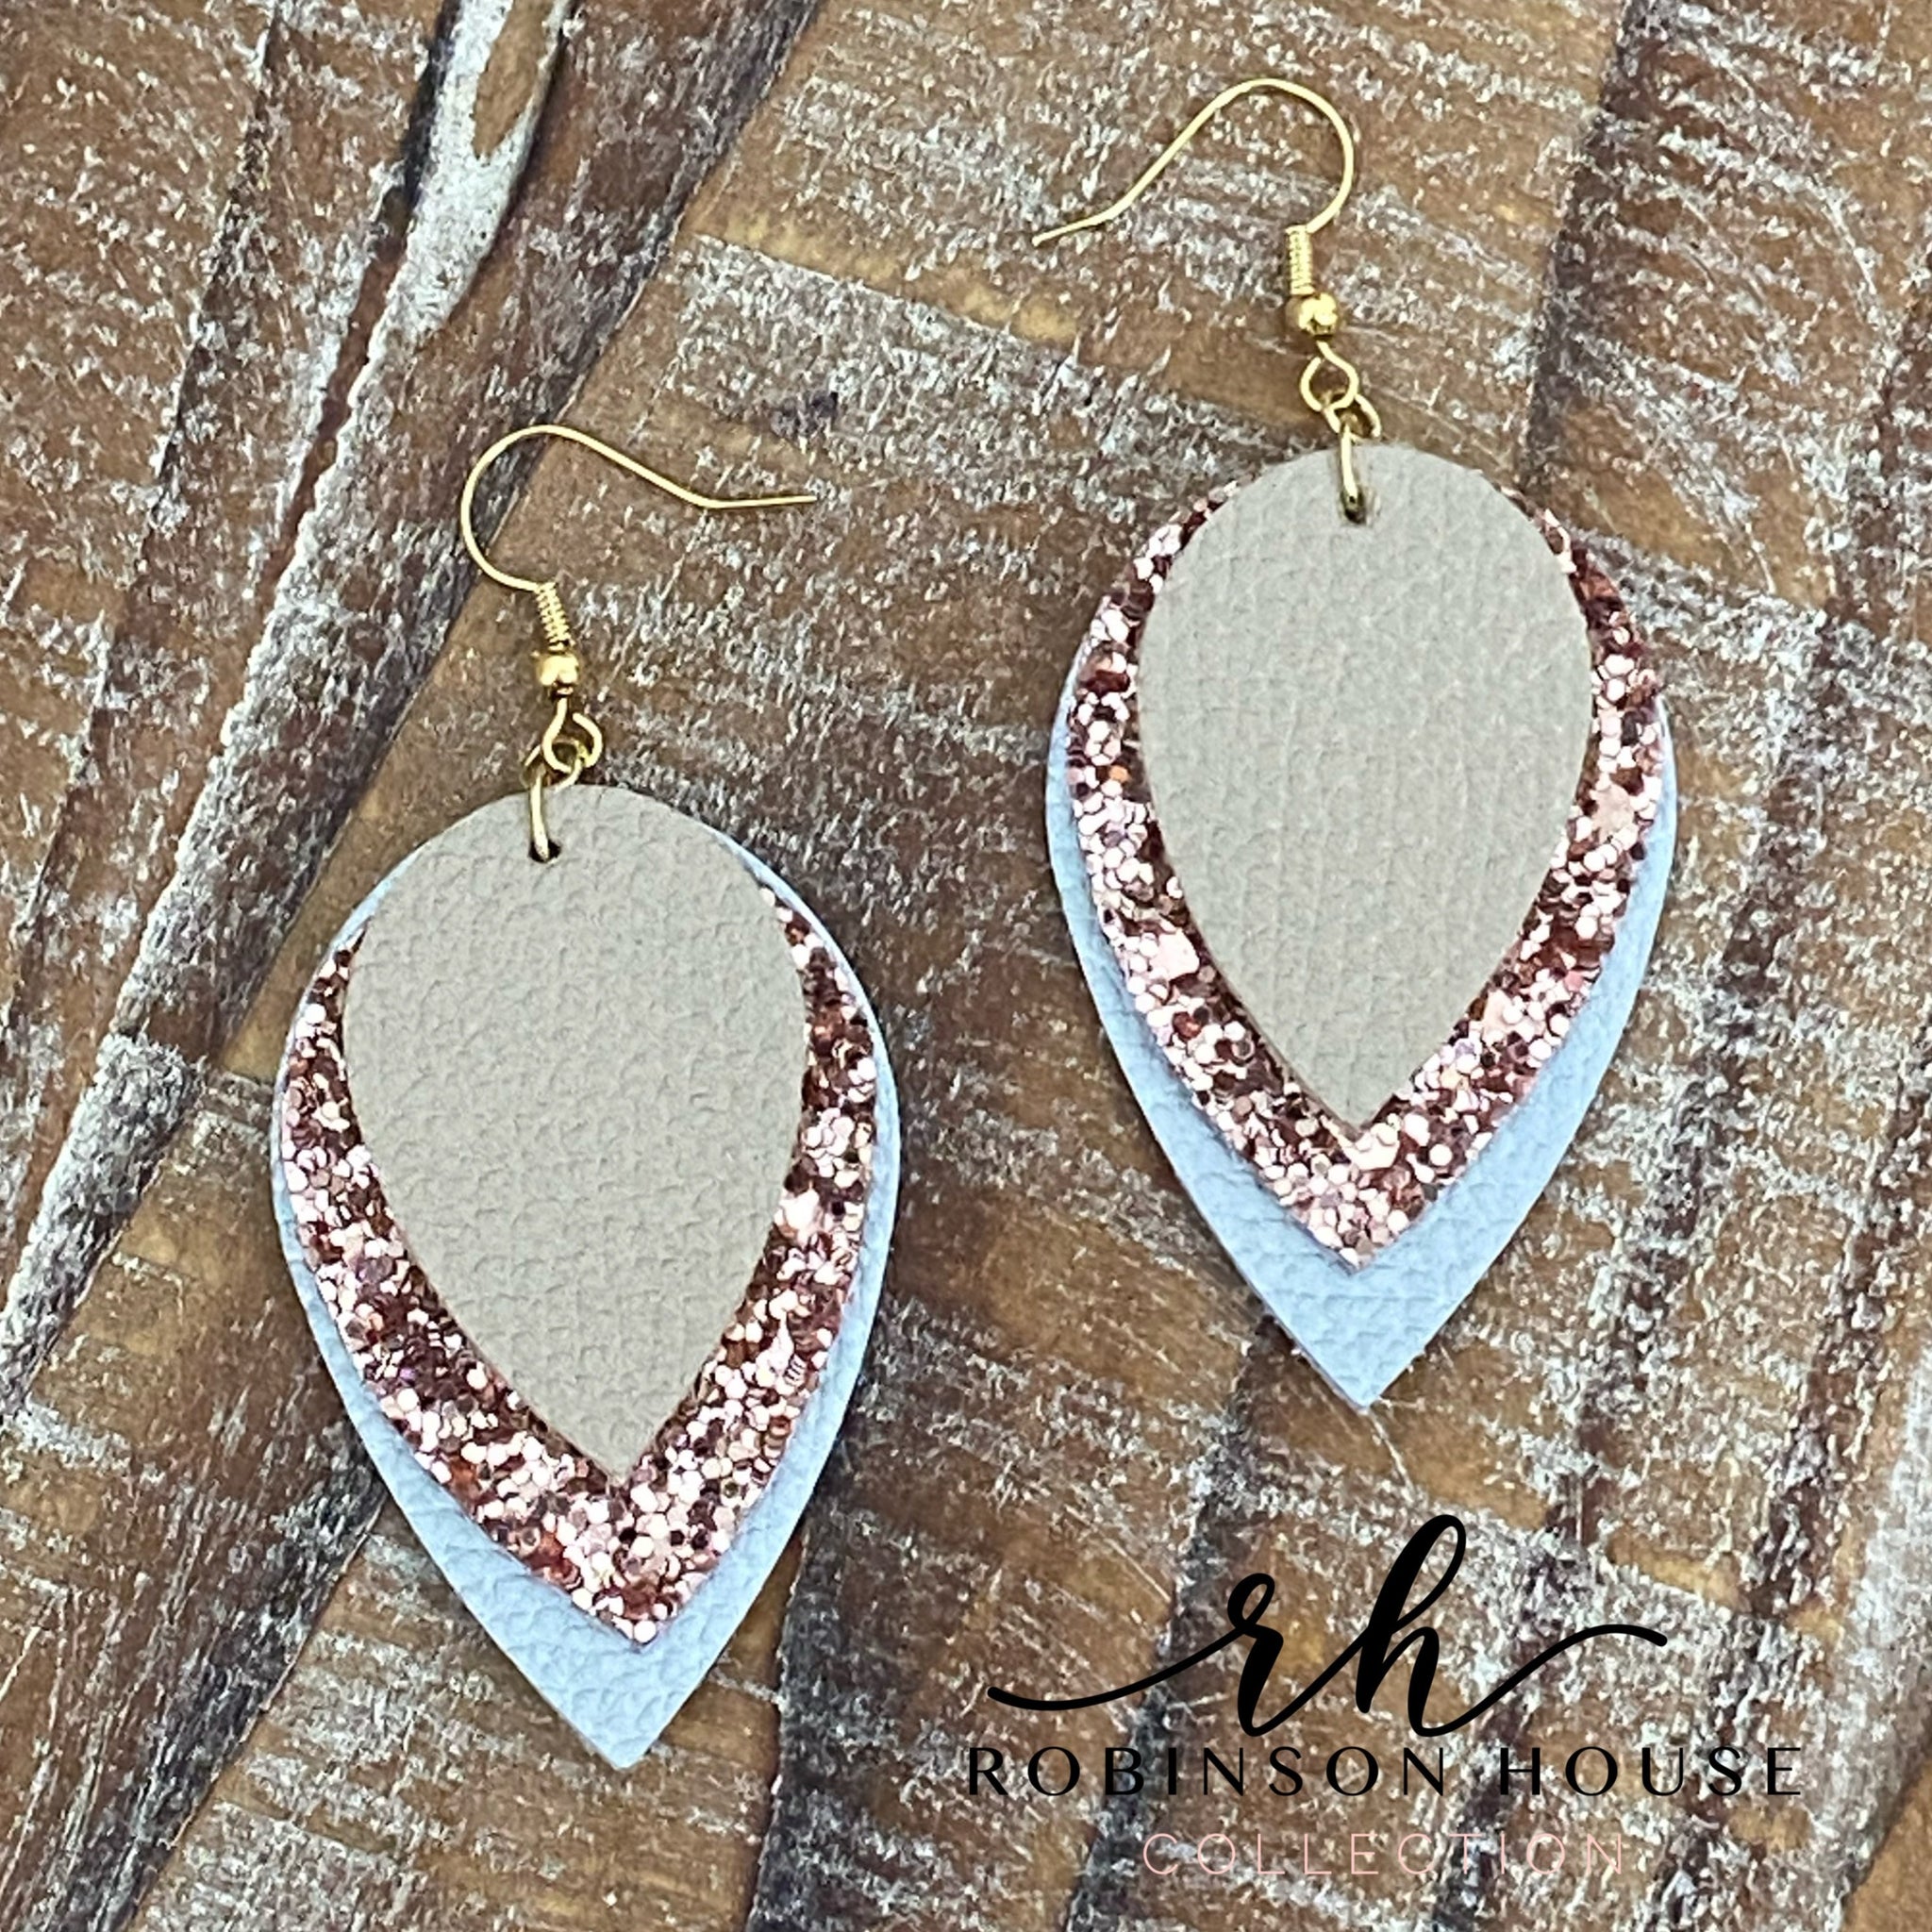 DIY faux leather earrings {An easy tutorial with step-by-step instructions}  — White Oak Originals